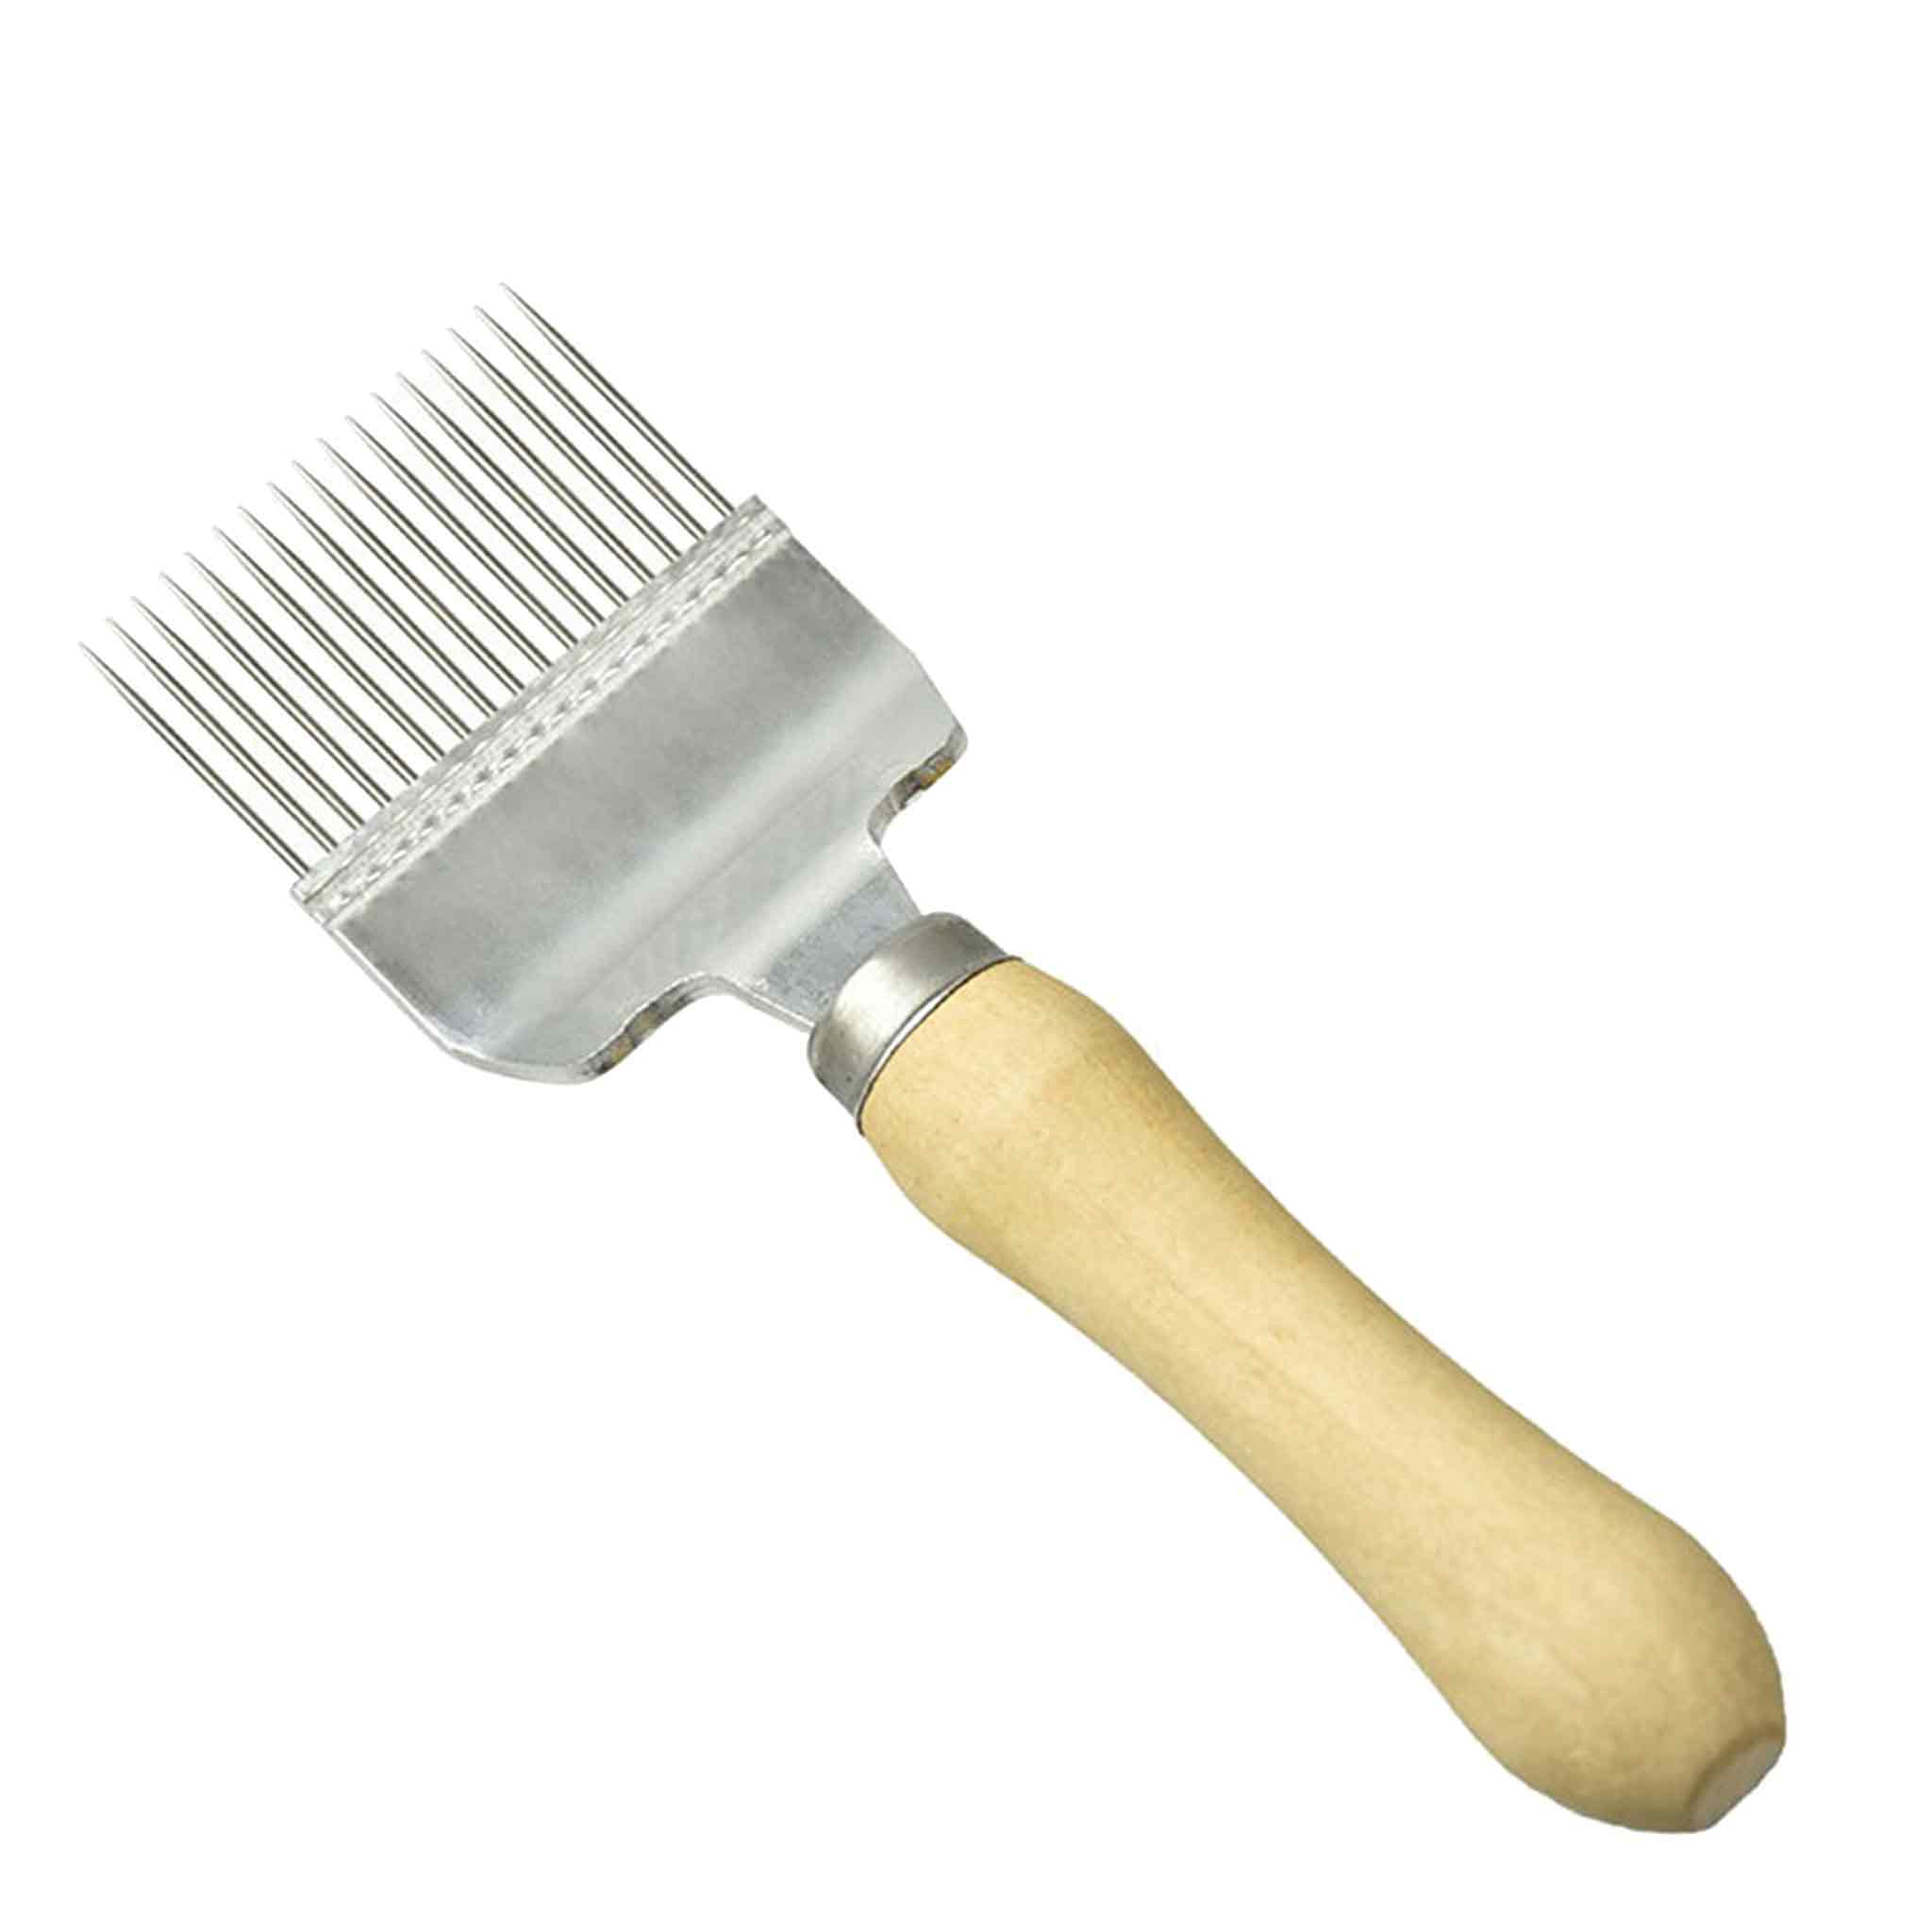 Uncapping Fork with Stainless Steel Needles and Wooden Handle - Processing collection by Buzzbee Beekeeping Supplies